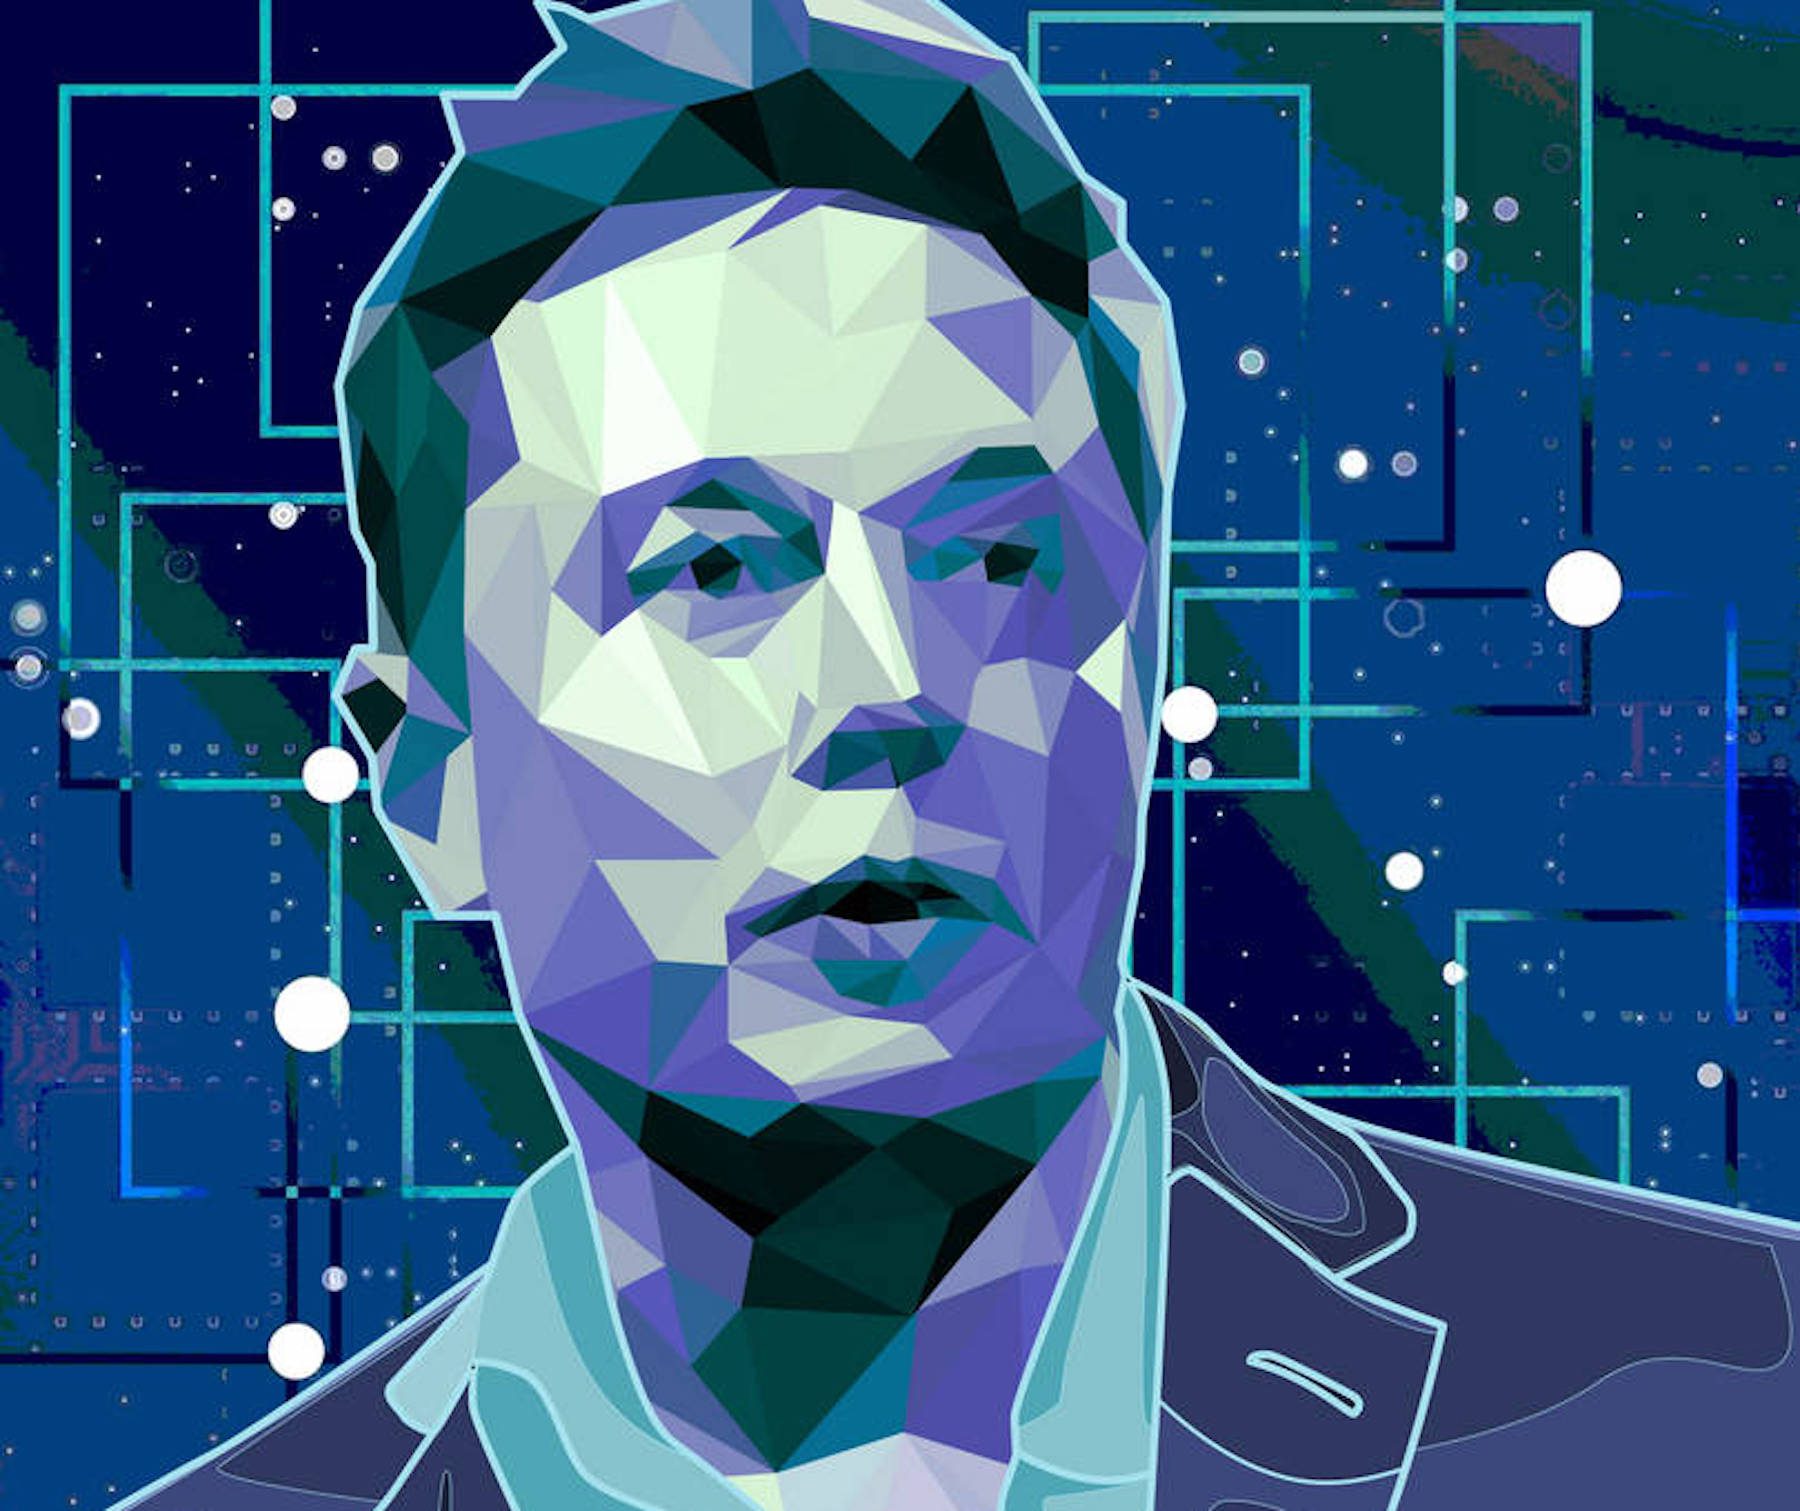 Elon Musk portrayed in color blocks of various shades of blue with abstract lines and dots in background.